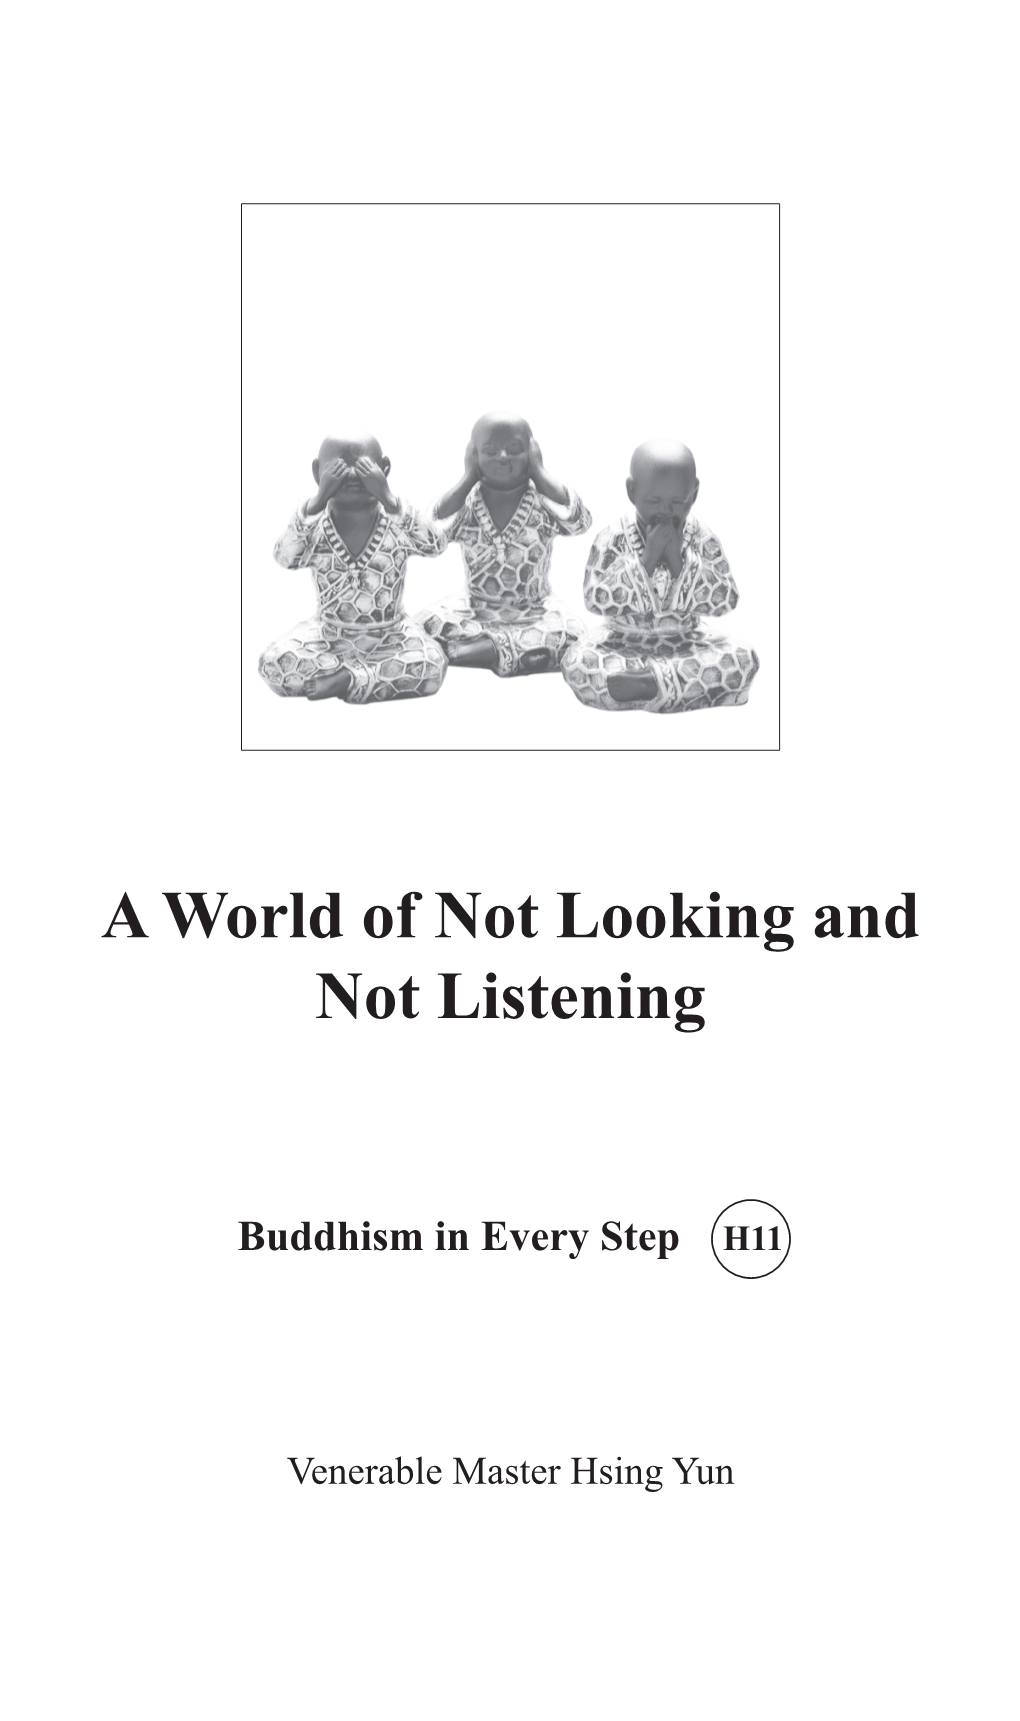 A World of Not Looking and Not Listening